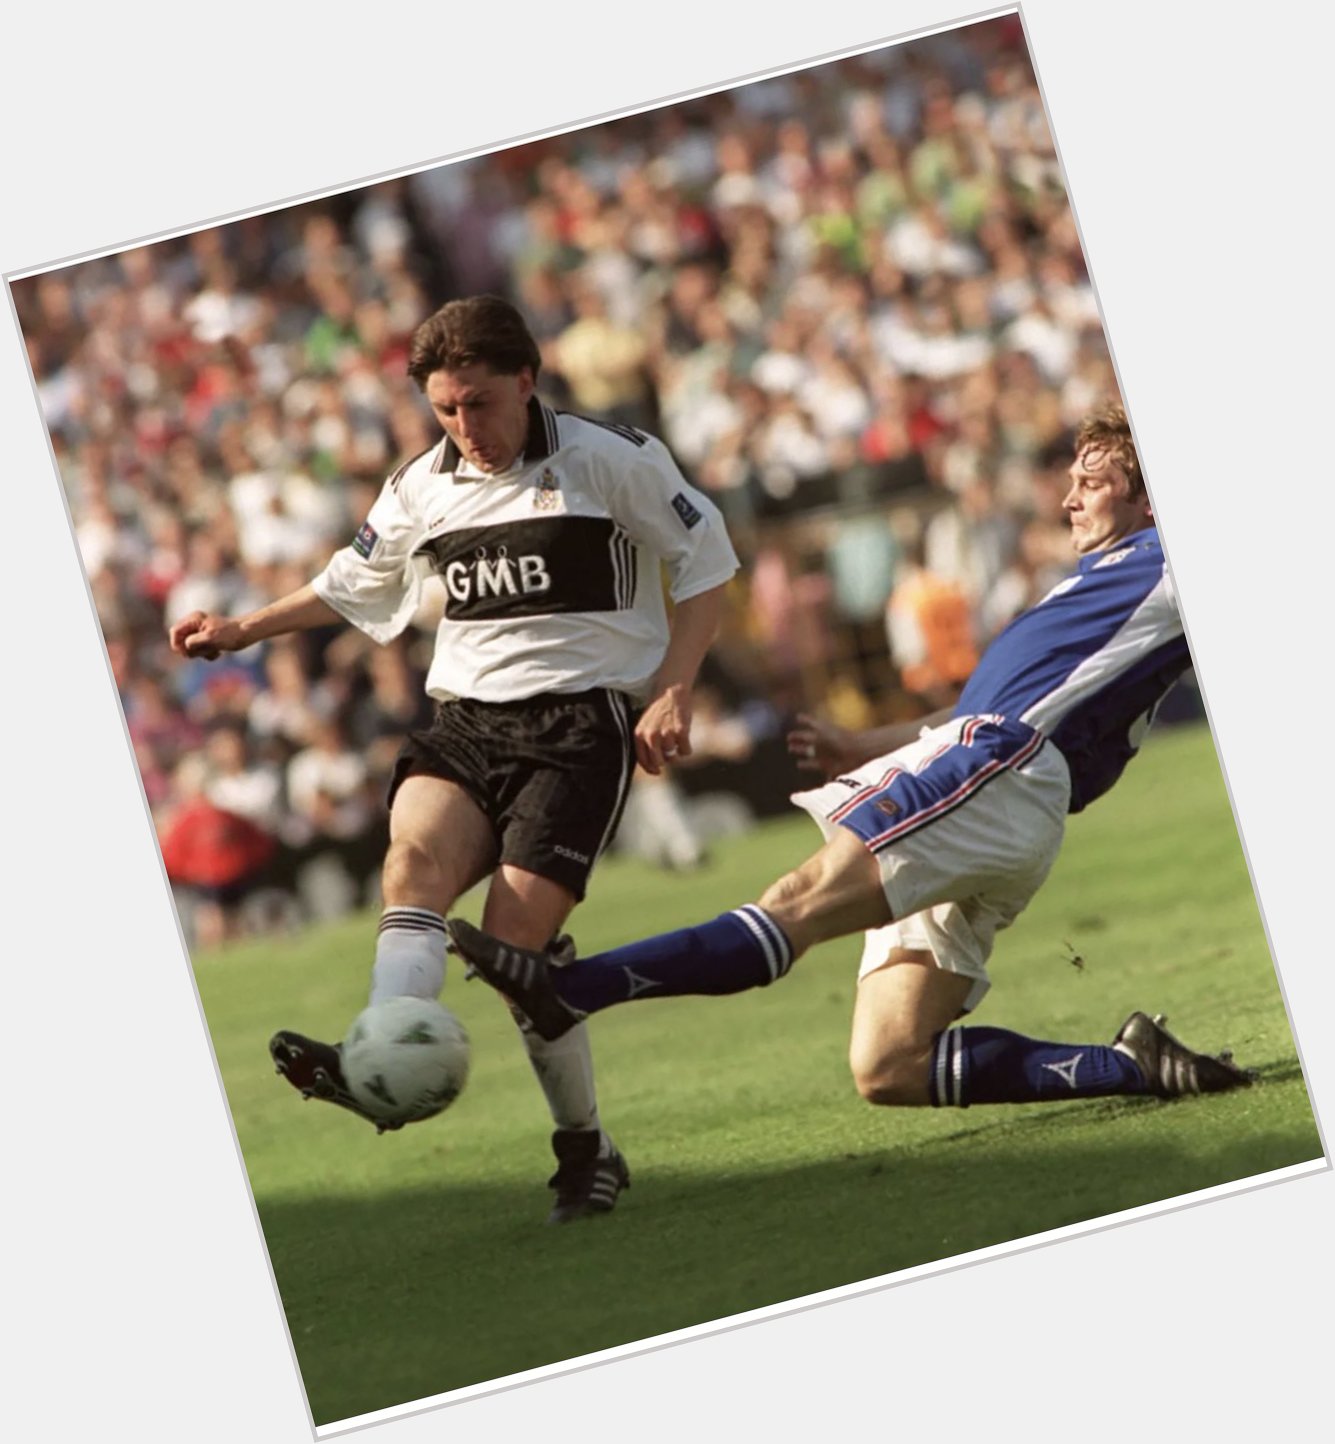 Happy 60th birthday wishes to Peter Beardsley !! 